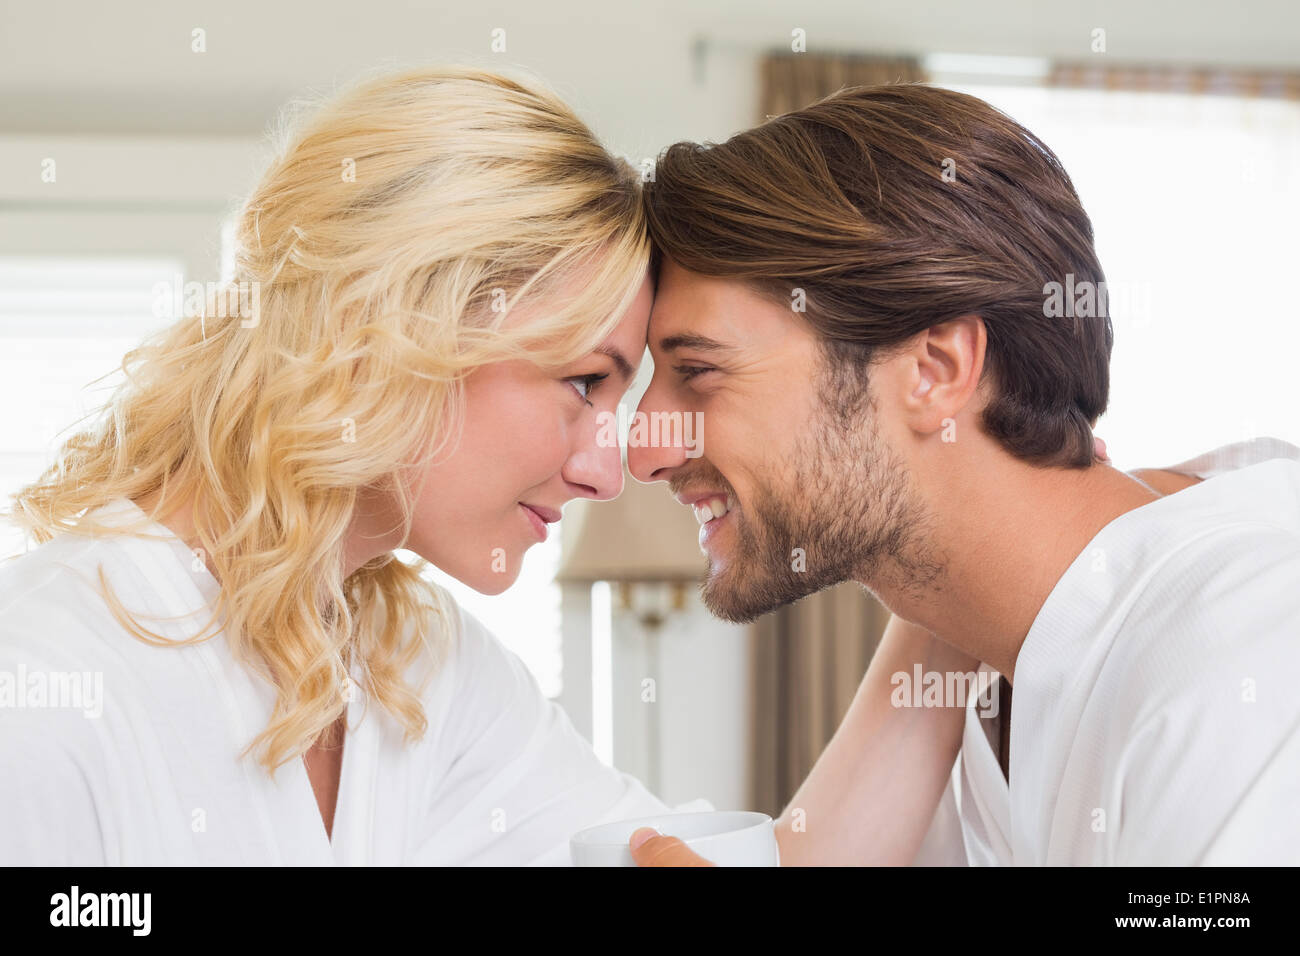 Cute couple in bathrobes touching heads Stock Photo